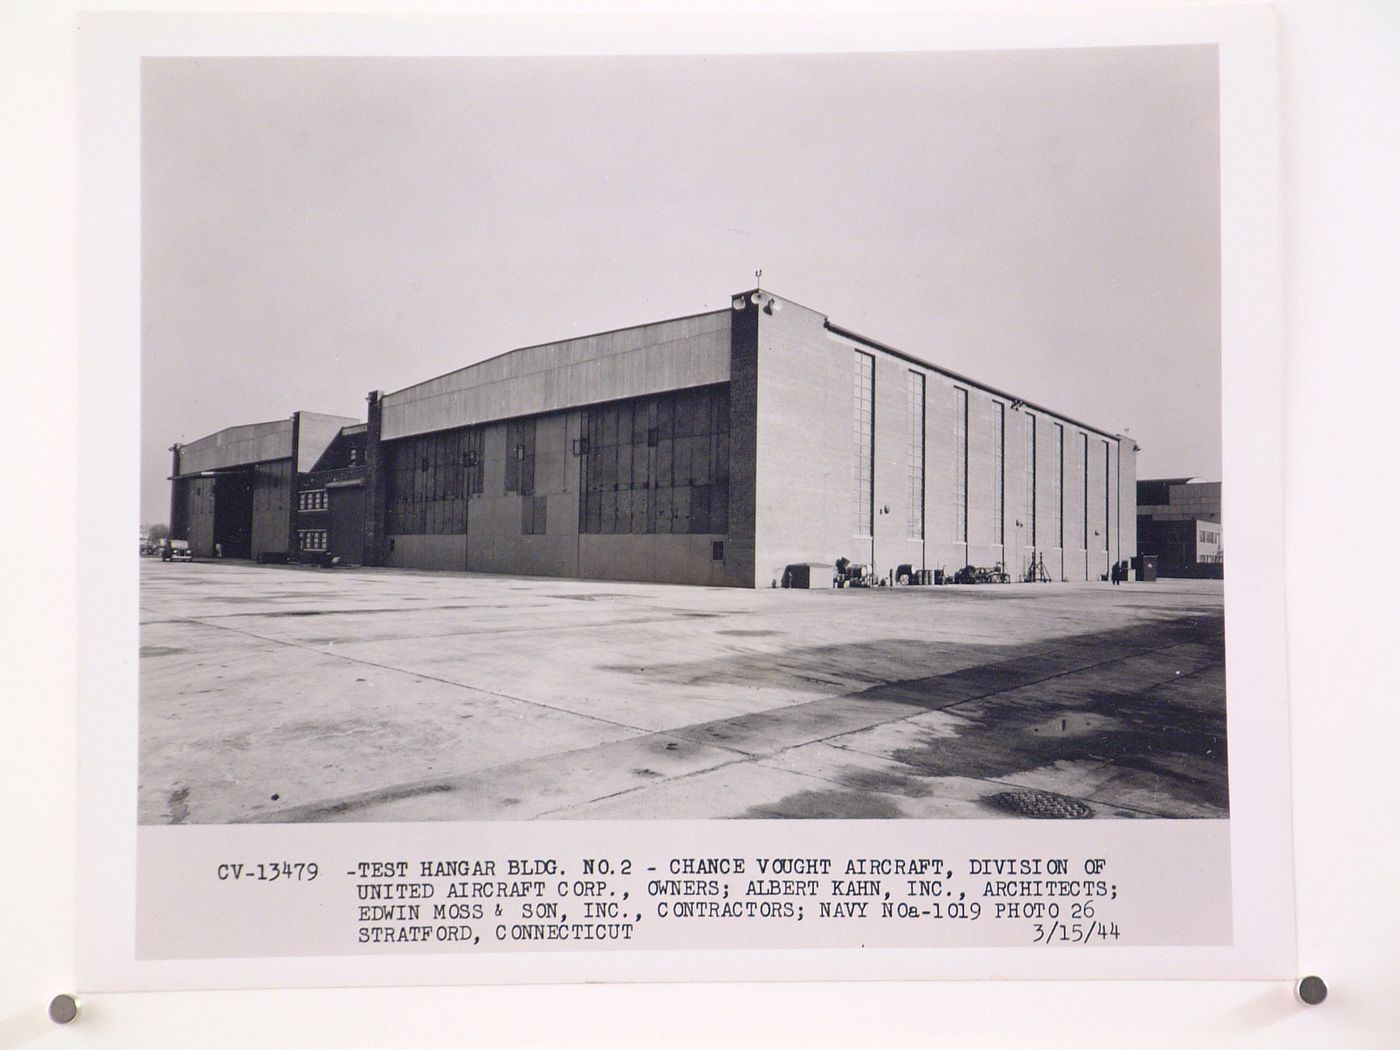 View of the principal and lateral façades of Hangar No. 2, United Aircraft Corporation Chance-Vought Airplane division Assembly Plant, Stratford, Connecticut